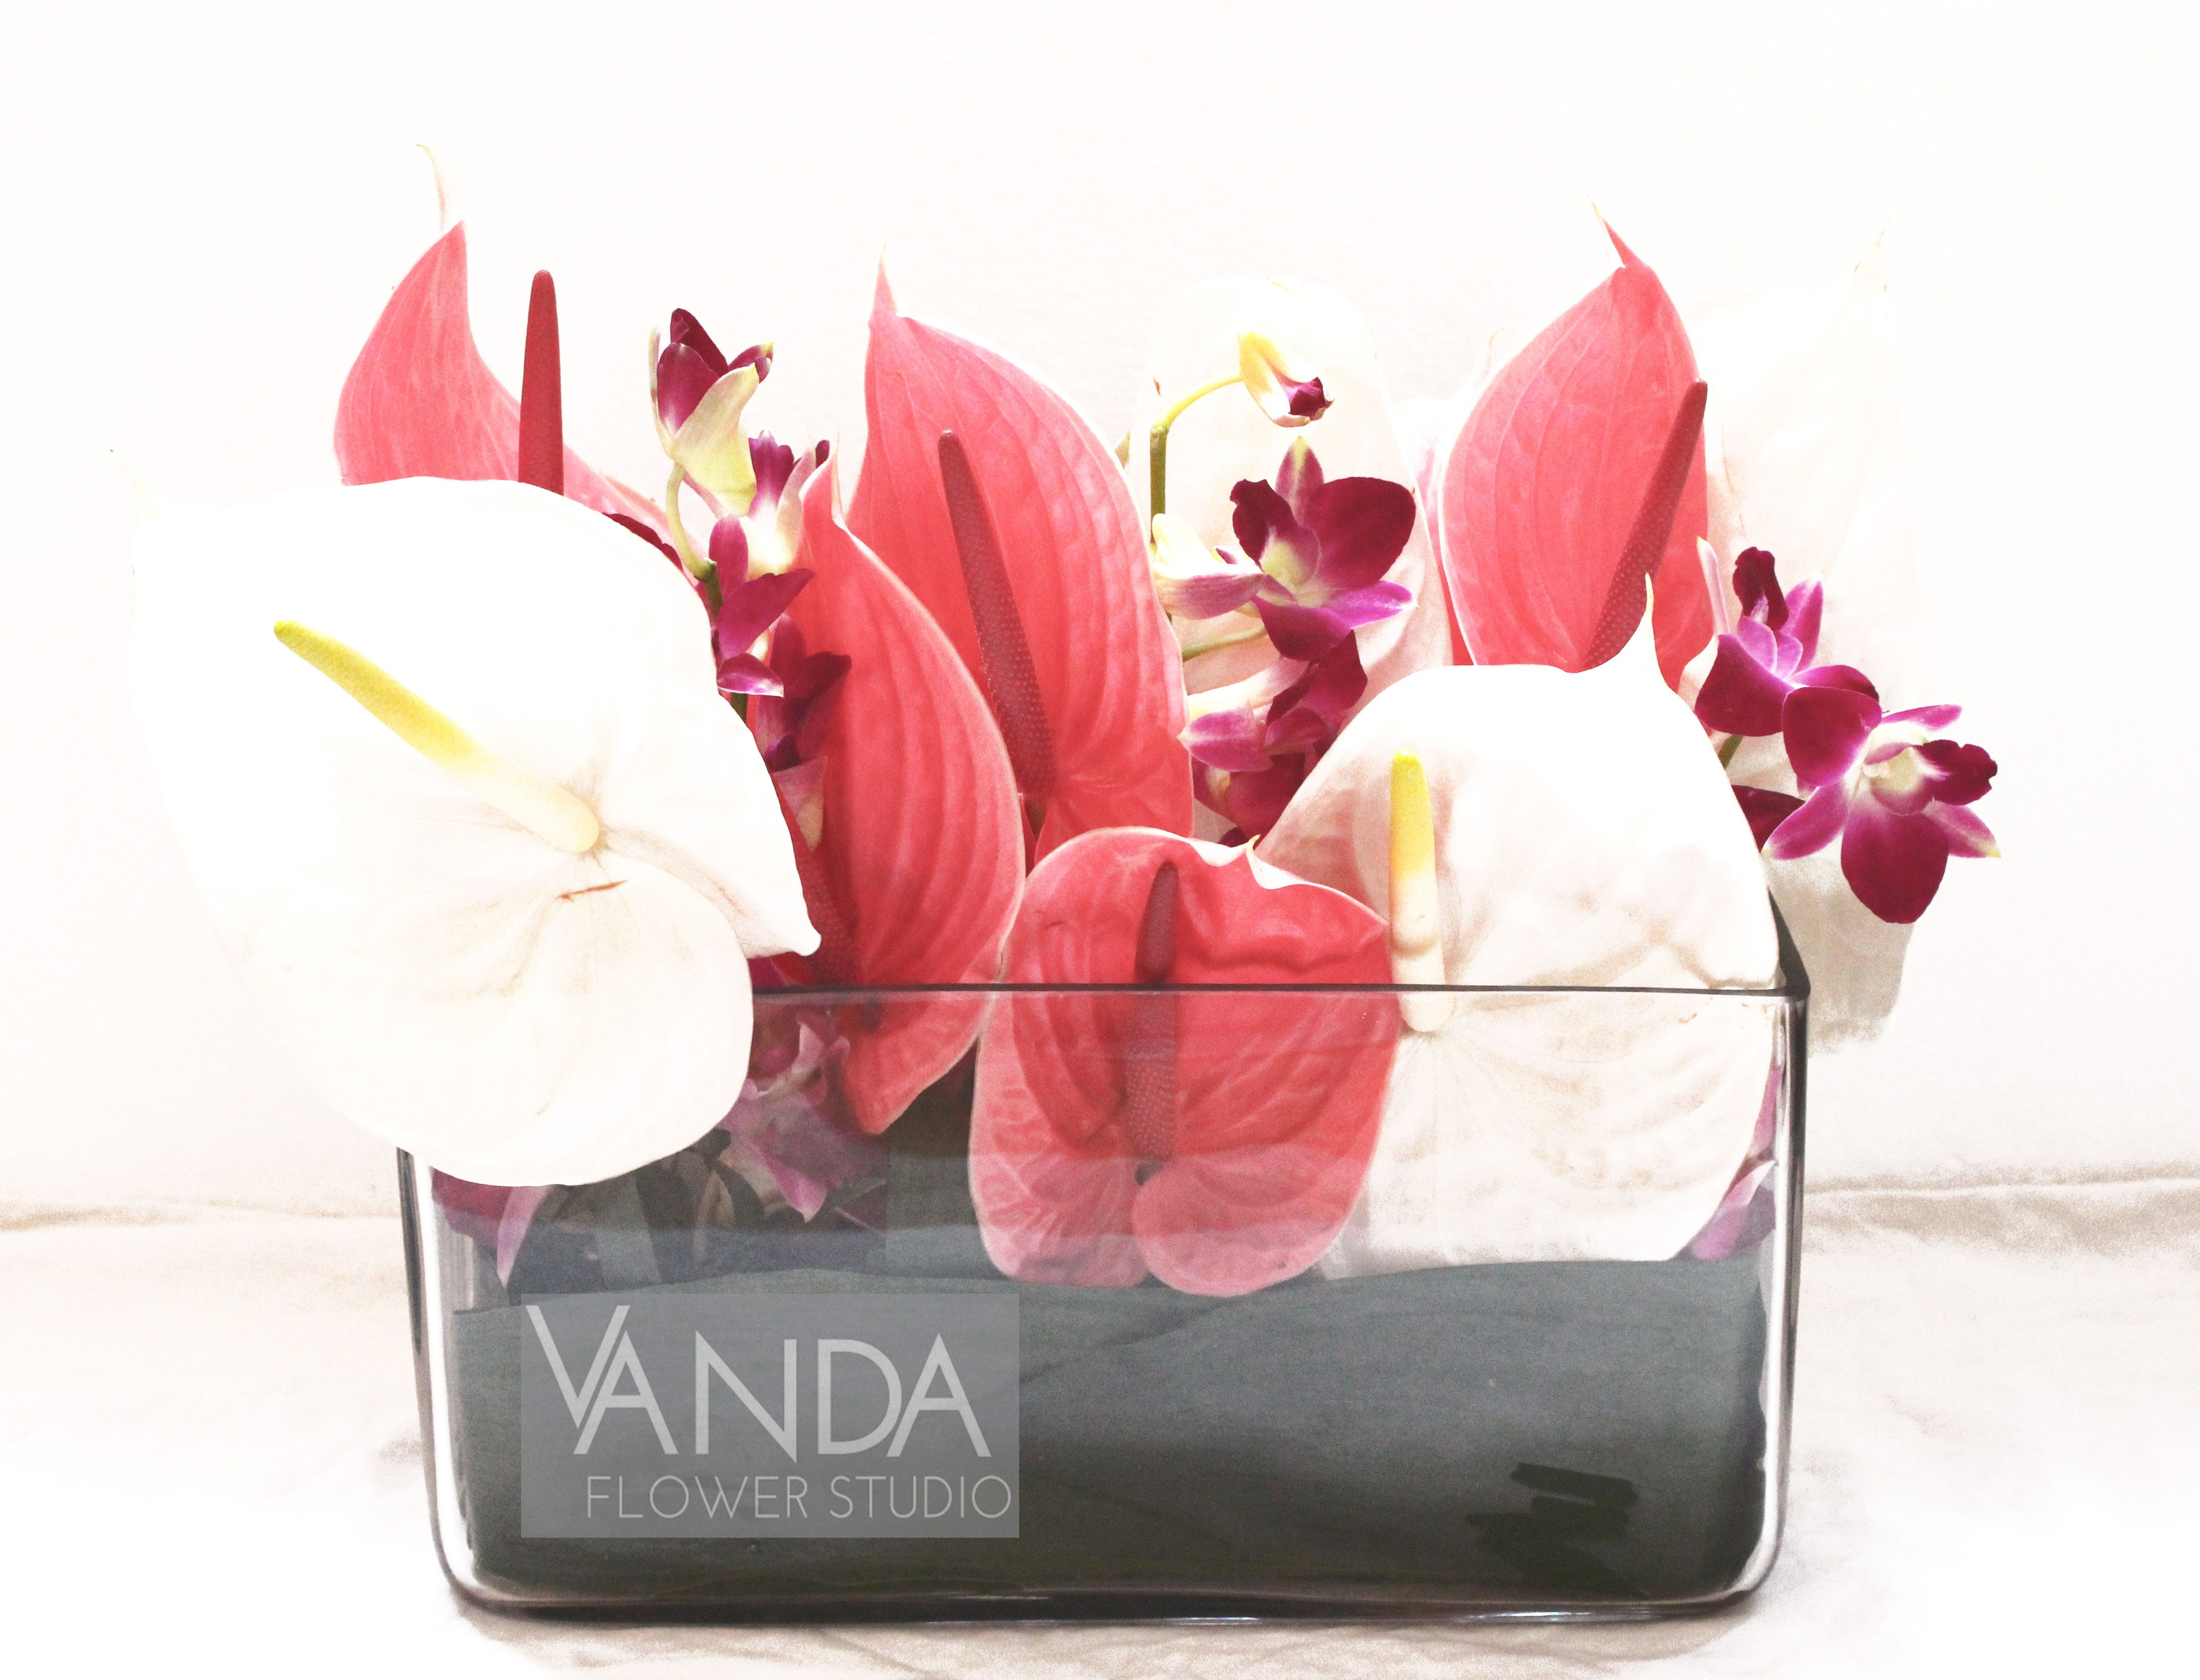 11 Wonderful Glass Vase with Leaves 2024 free download glass vase with leaves of prawn and white anthuriums and deep cerise cymbidium orchids rapped throughout prawn and white anthuriums and deep cerise cymbidium orchids rapped with aspidistra l